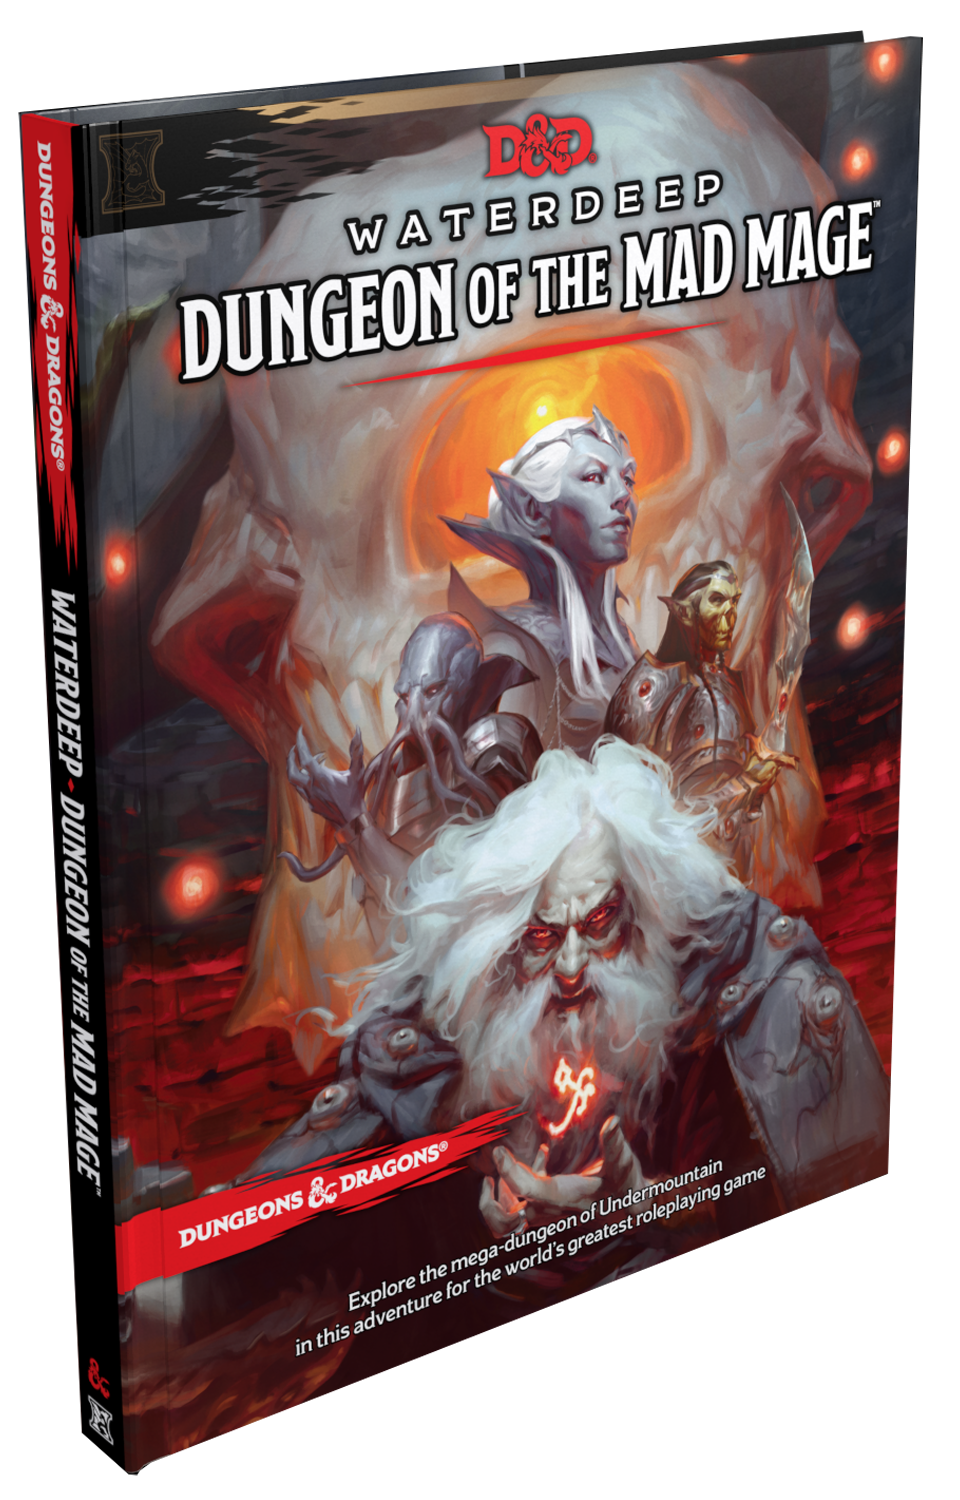 Dungeons & Dragons 5th edition - Waterdeep: Dungeon of the Mad Mage